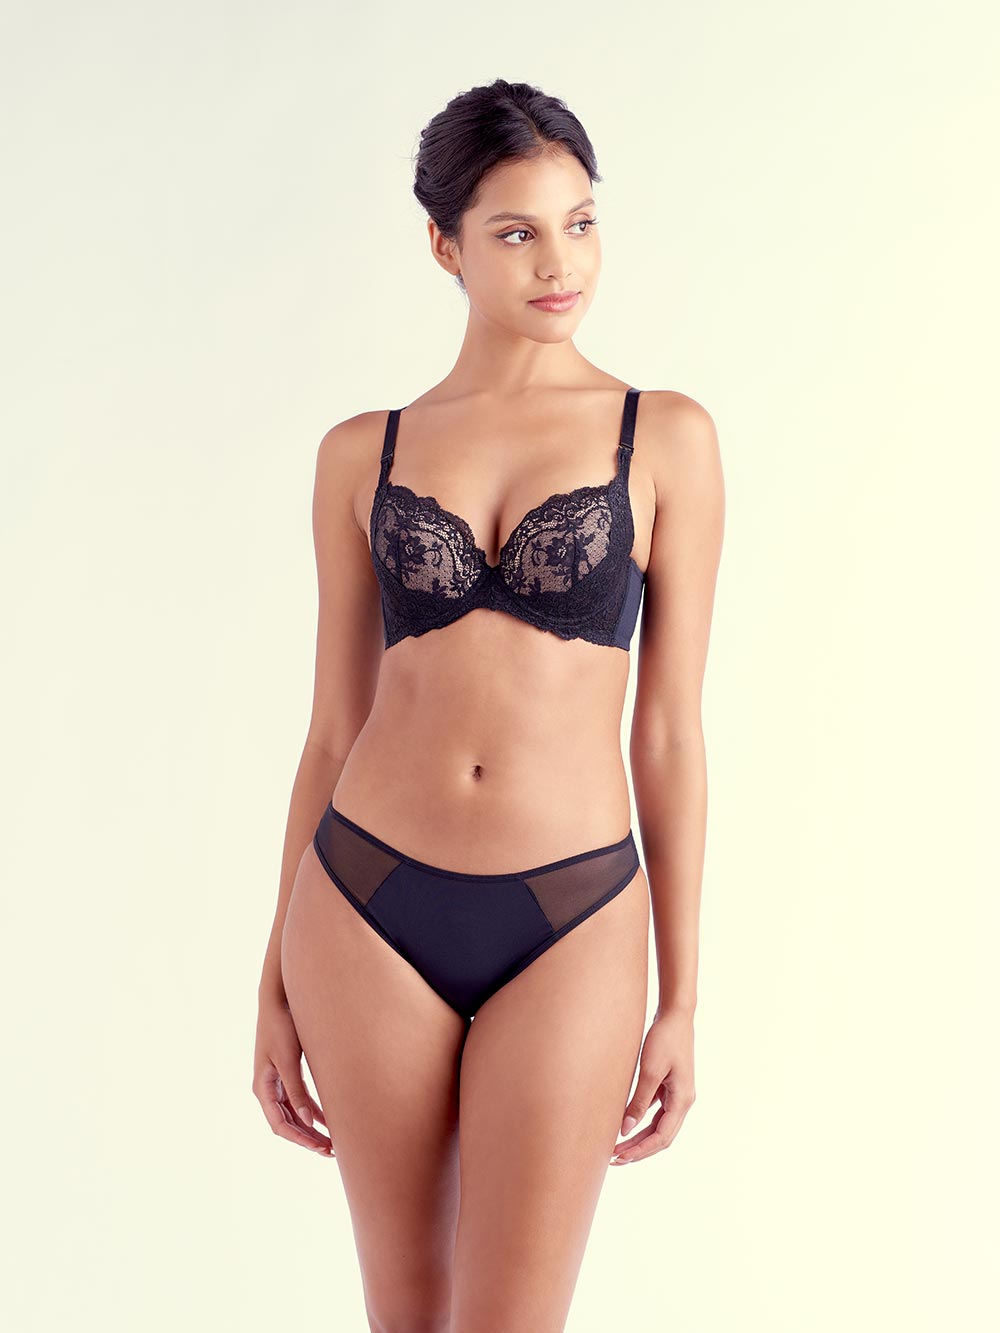 Rell Push-Up Bra, Petites, Extra Wide Band, Removable Push-Up Pads